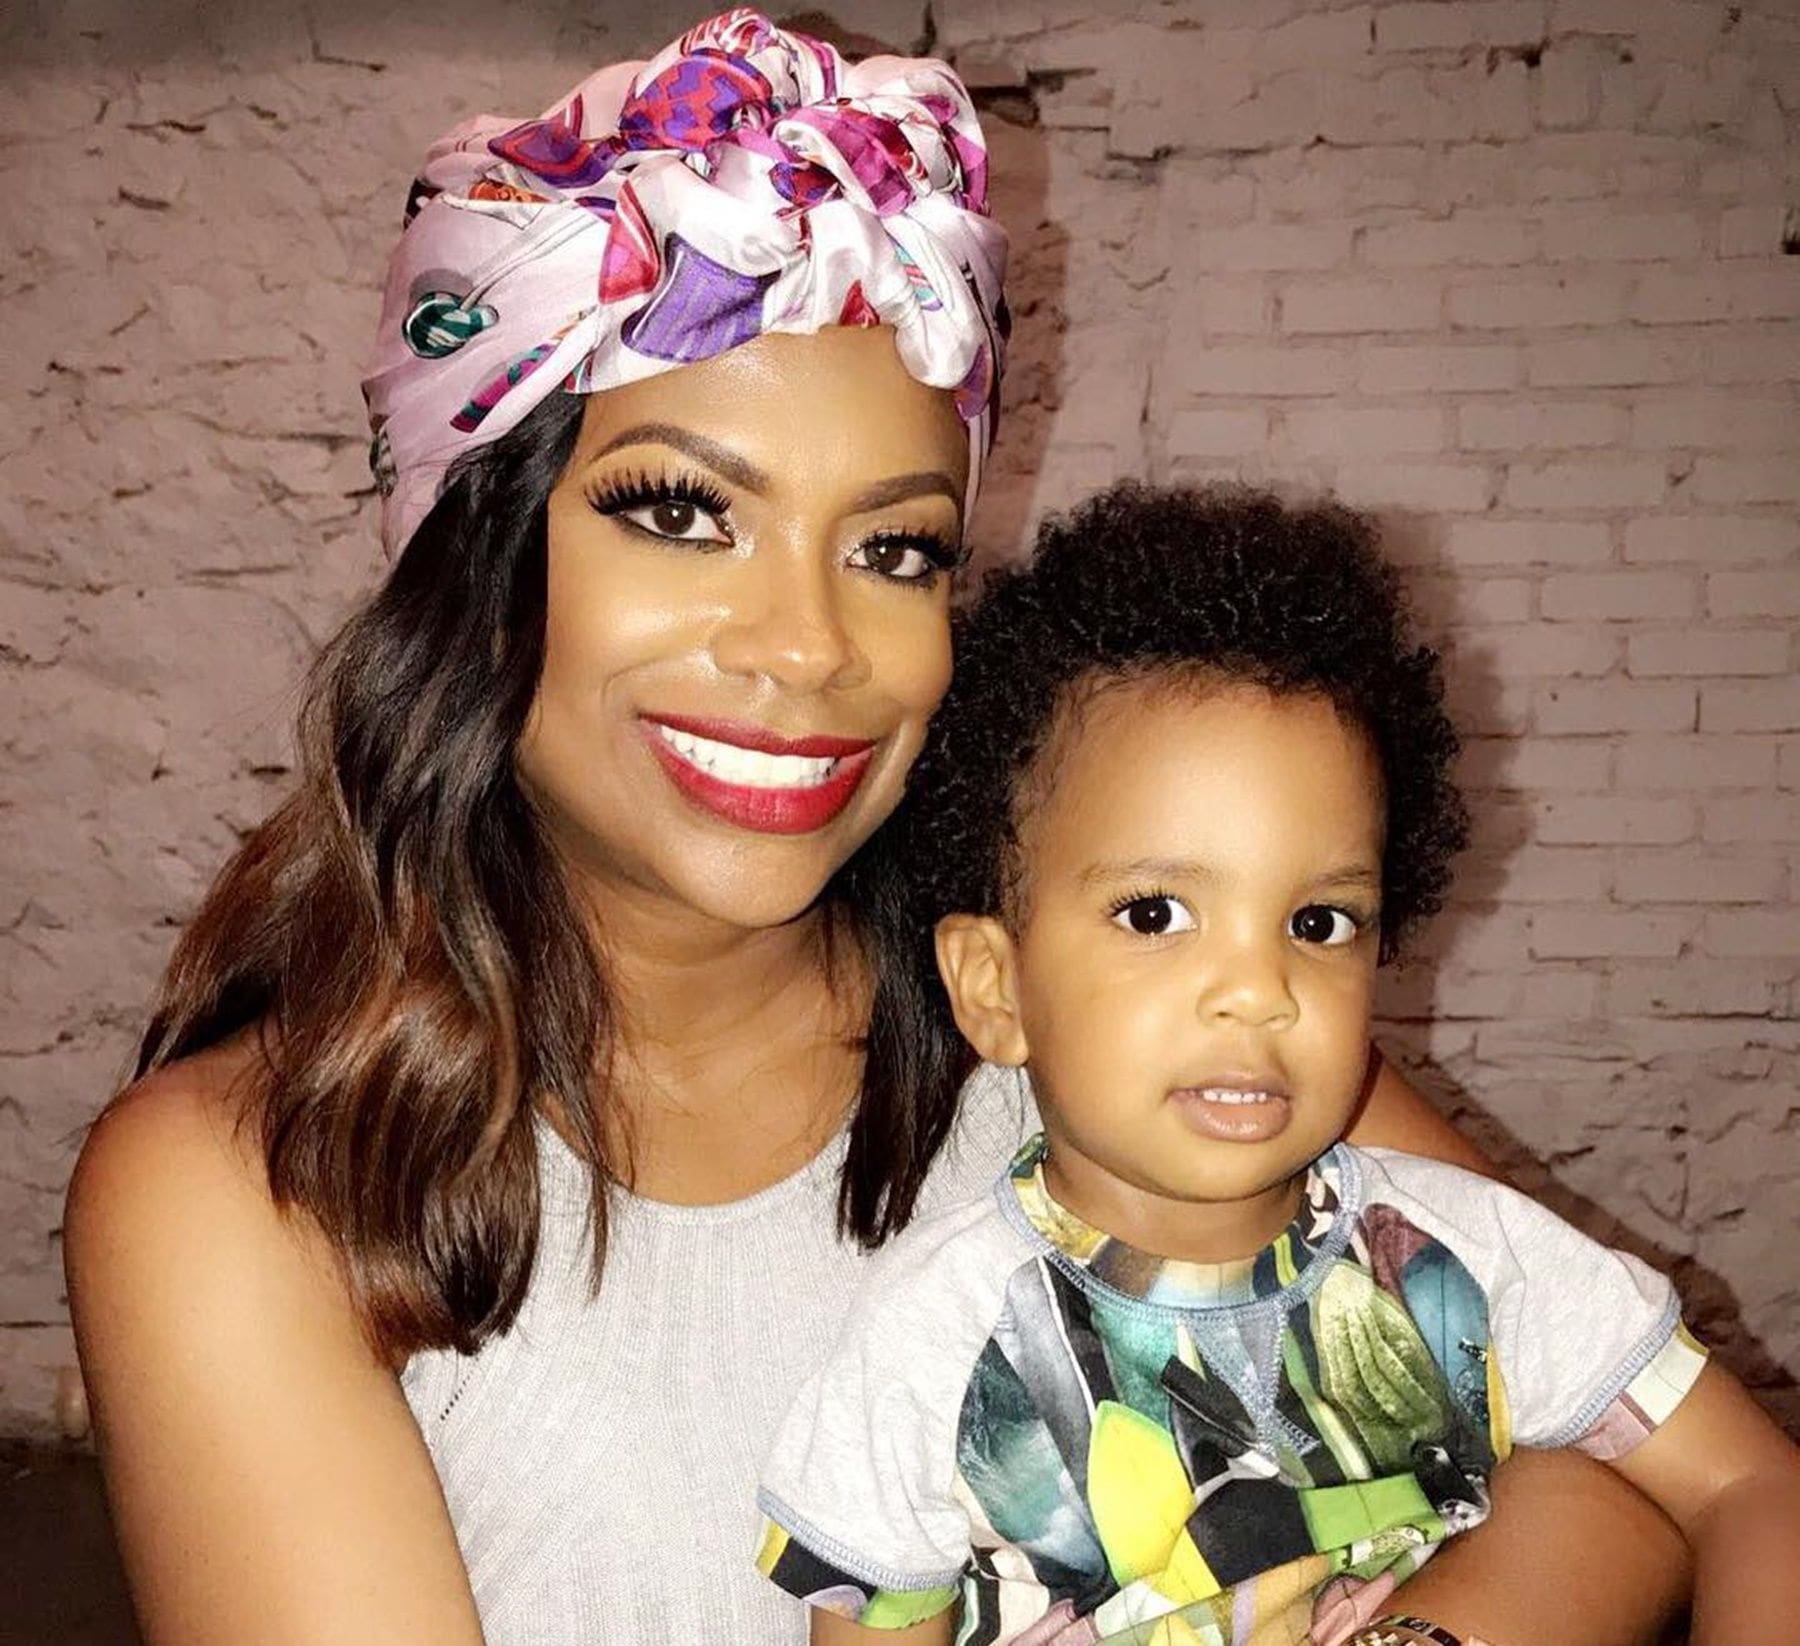 Kandi Burruss Is Proudly Showing Us An Extremely Impressive Video Of Her Three-Year-Old Son, Ace Wells Tucker Speaking Mandarin